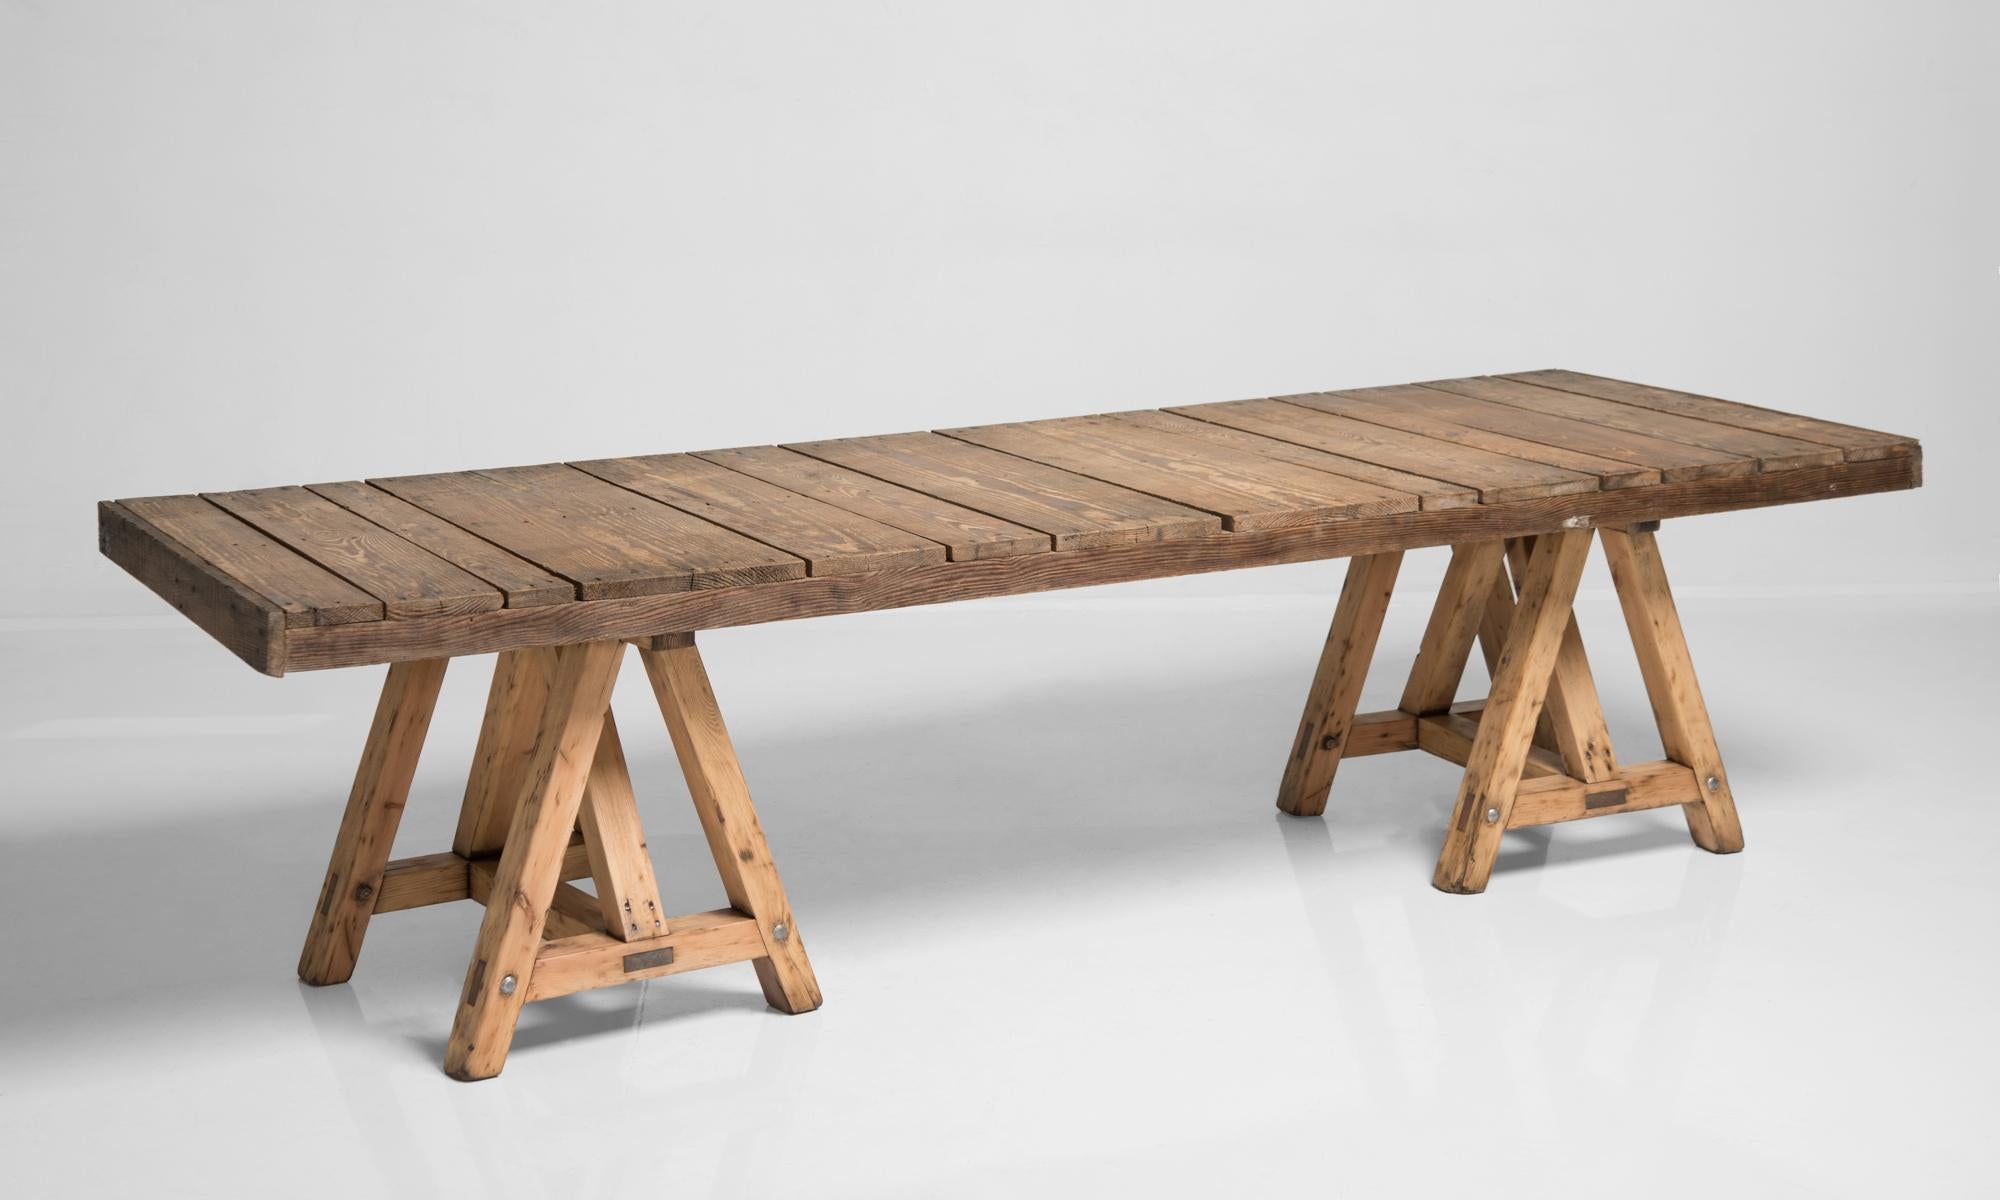 Pine trestle table, France circa 1930.

Rustic construction with plank top and substantial sawhorse legs.

Measures: 111.5